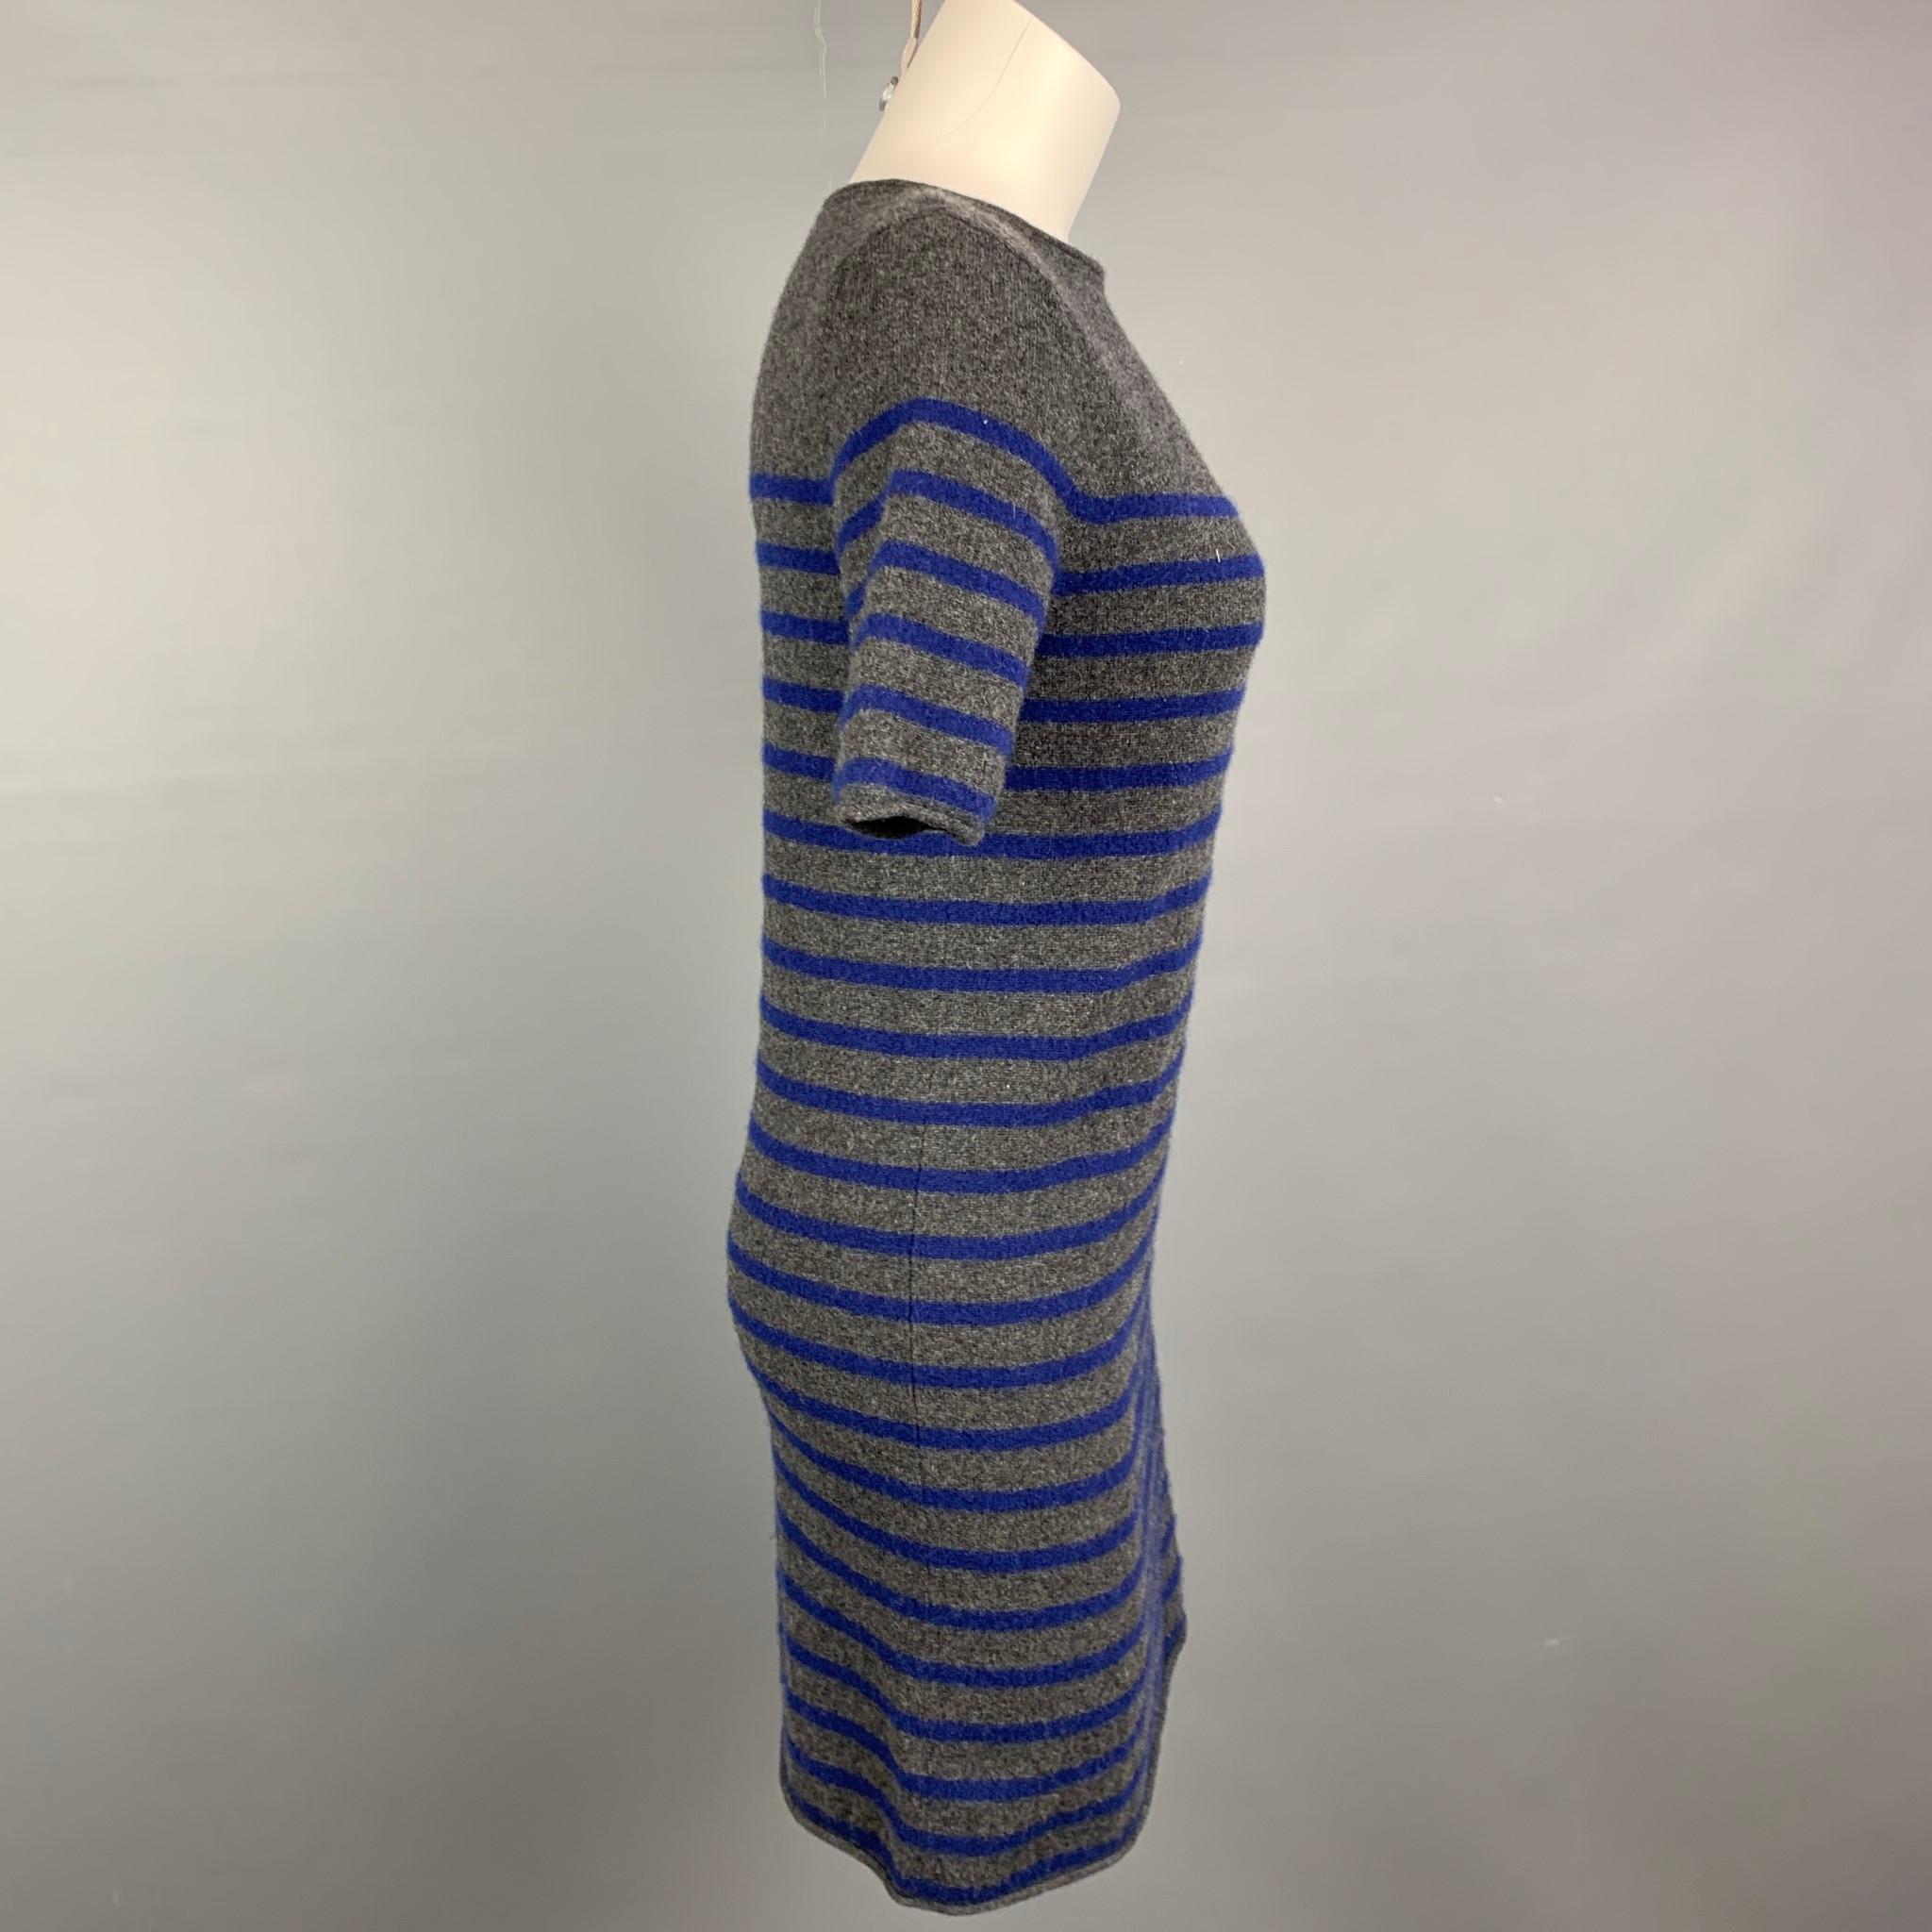 DEMYLEE dress comes in a grey & navy knitted stripe cashmere featuring a shift style, short sleeves, and a crew-neck.

Very Good Pre-Owned Condition.
Marked: S

Measurements:

Shoulder: 15 in.
Bust: 34 in.
Hip: 33 in.
Sleeve: 11 in.
Length: 32 in. 